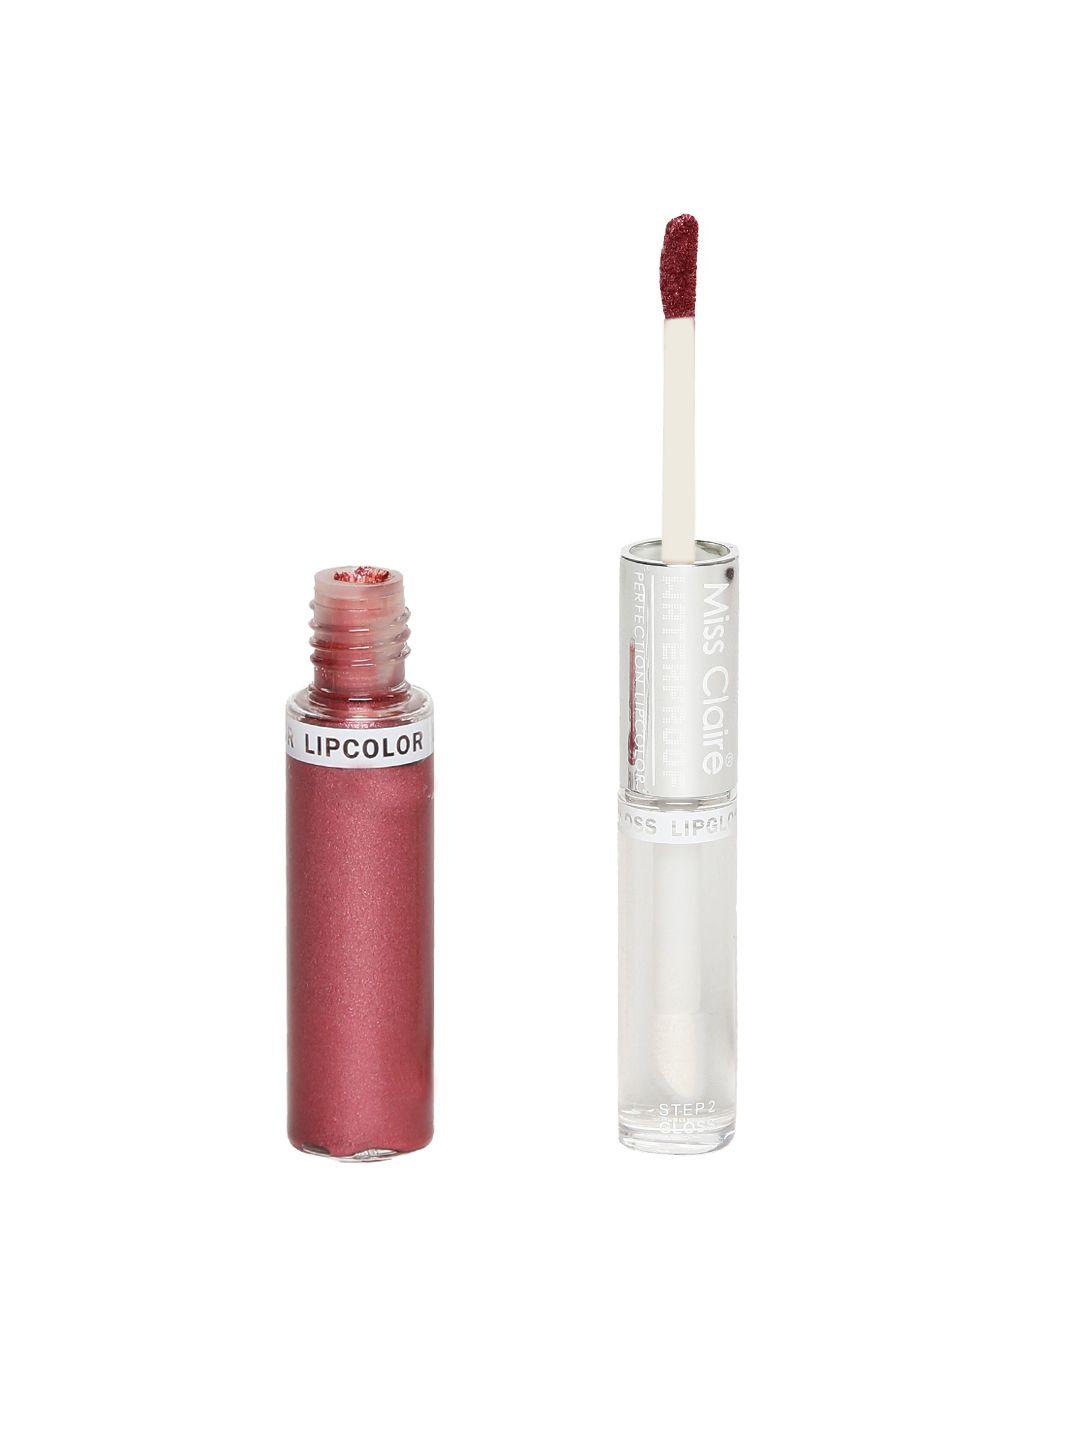 miss-claire-25-waterproof-perfection-lip-color-&-lip-gloss-10-ml